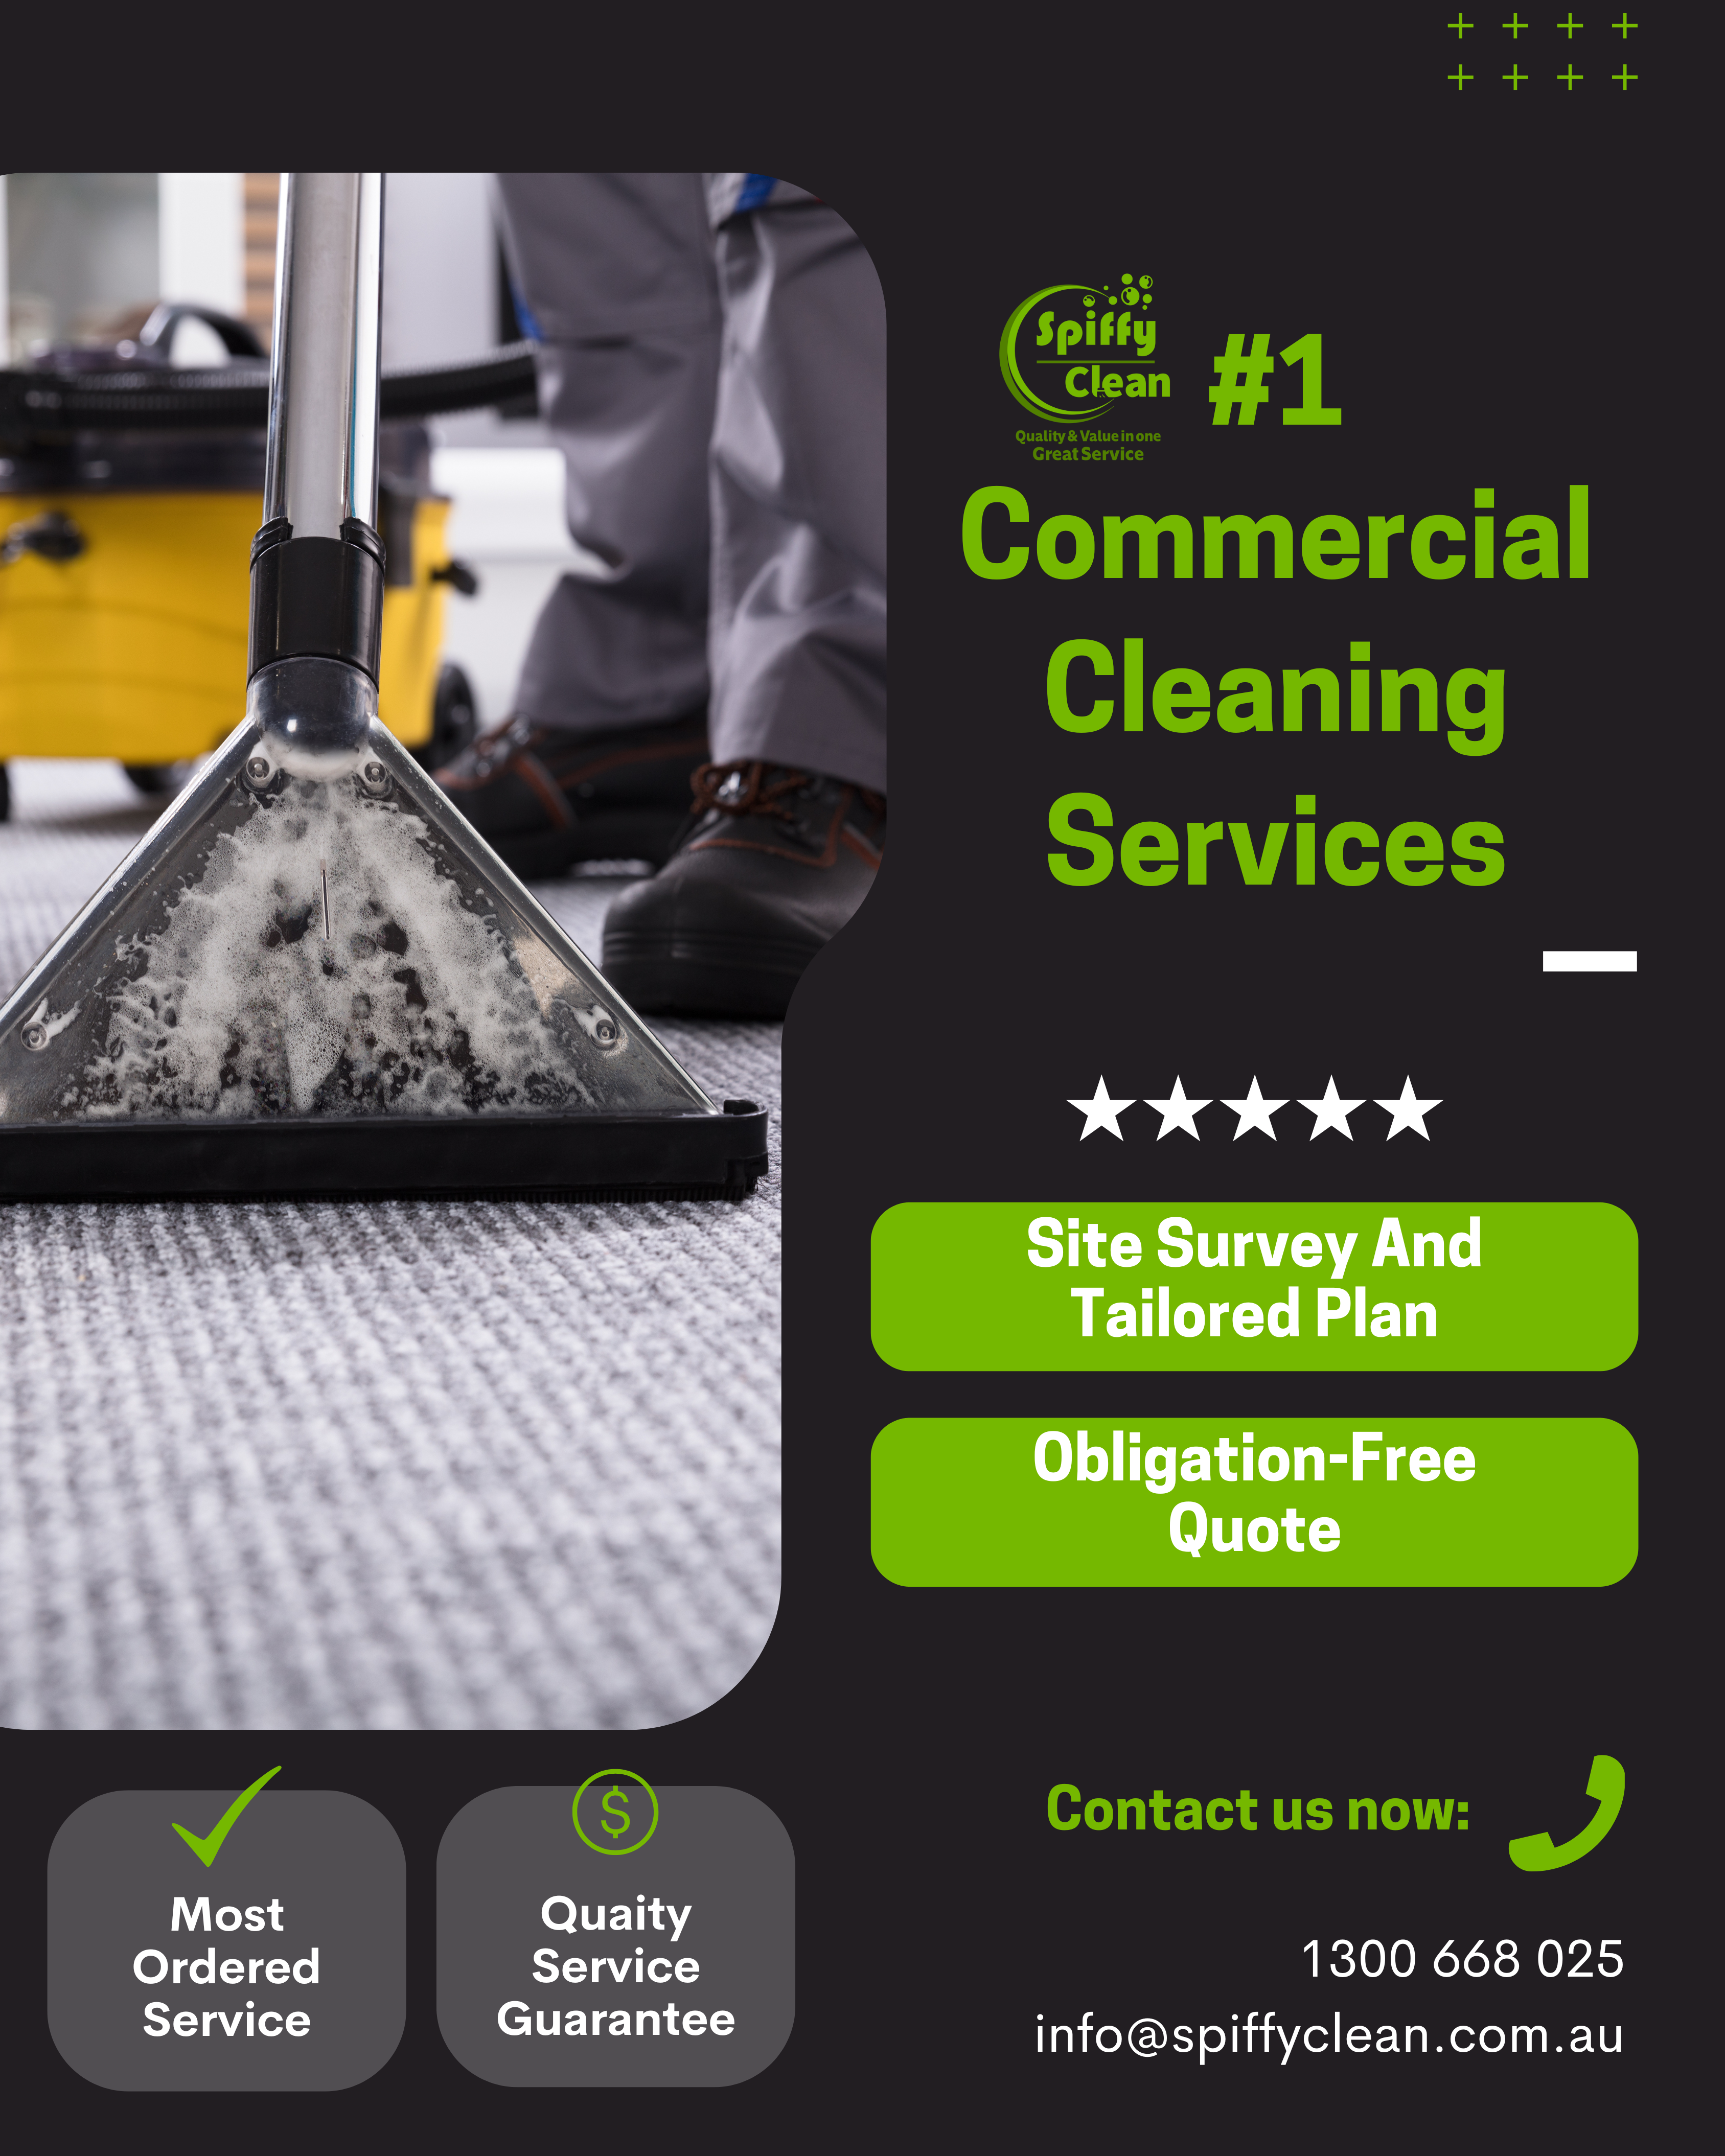 Comprehensive Cleaning Solutions in Melbourne: Spiffy Clean